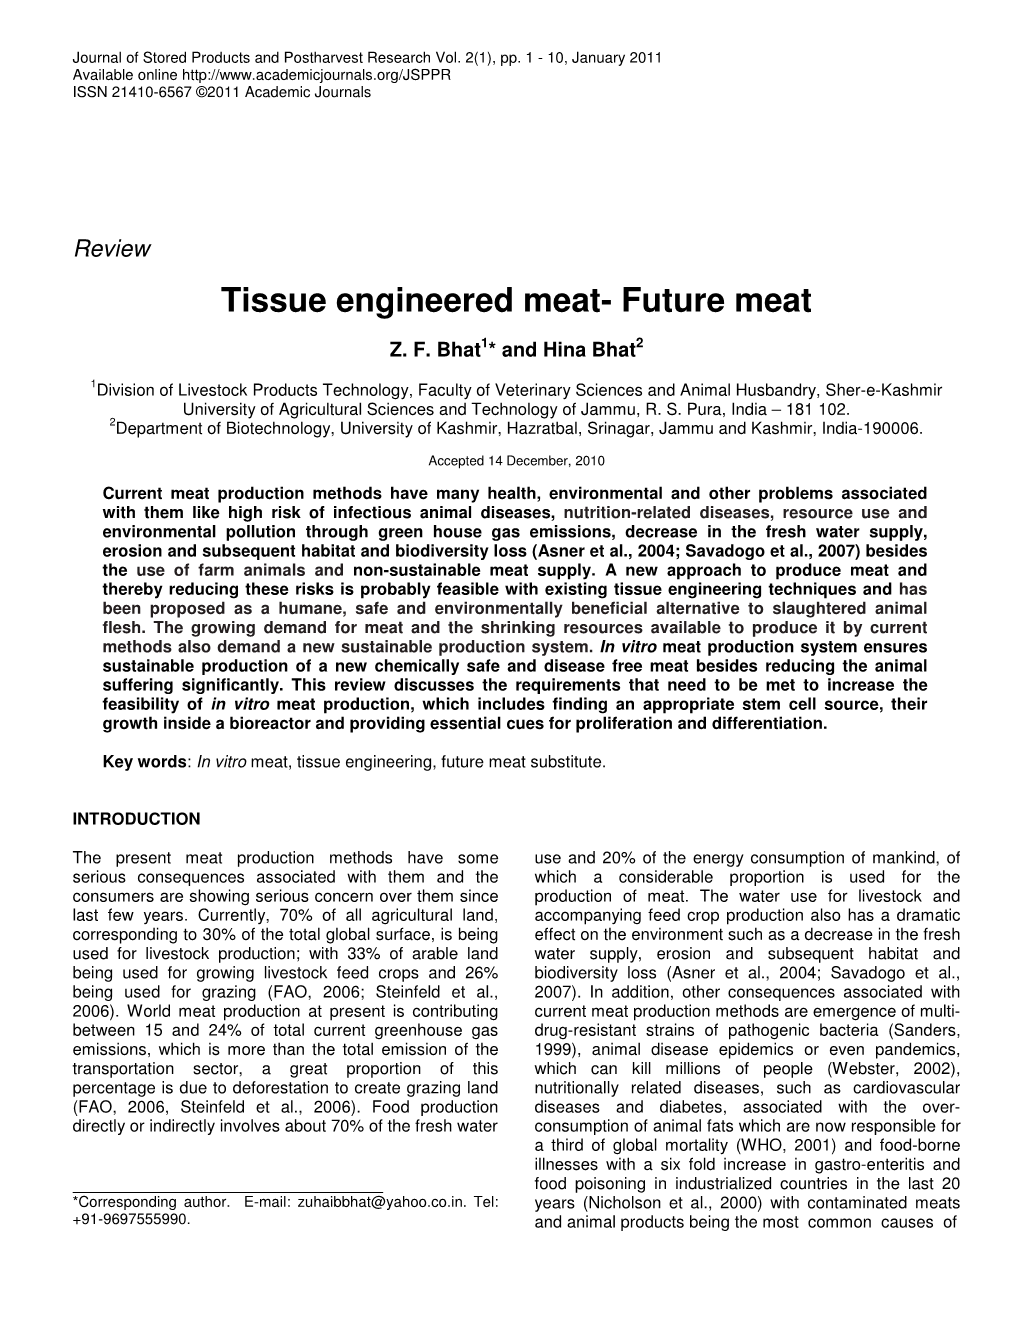 Tissue Engineered Meat- Future Meat